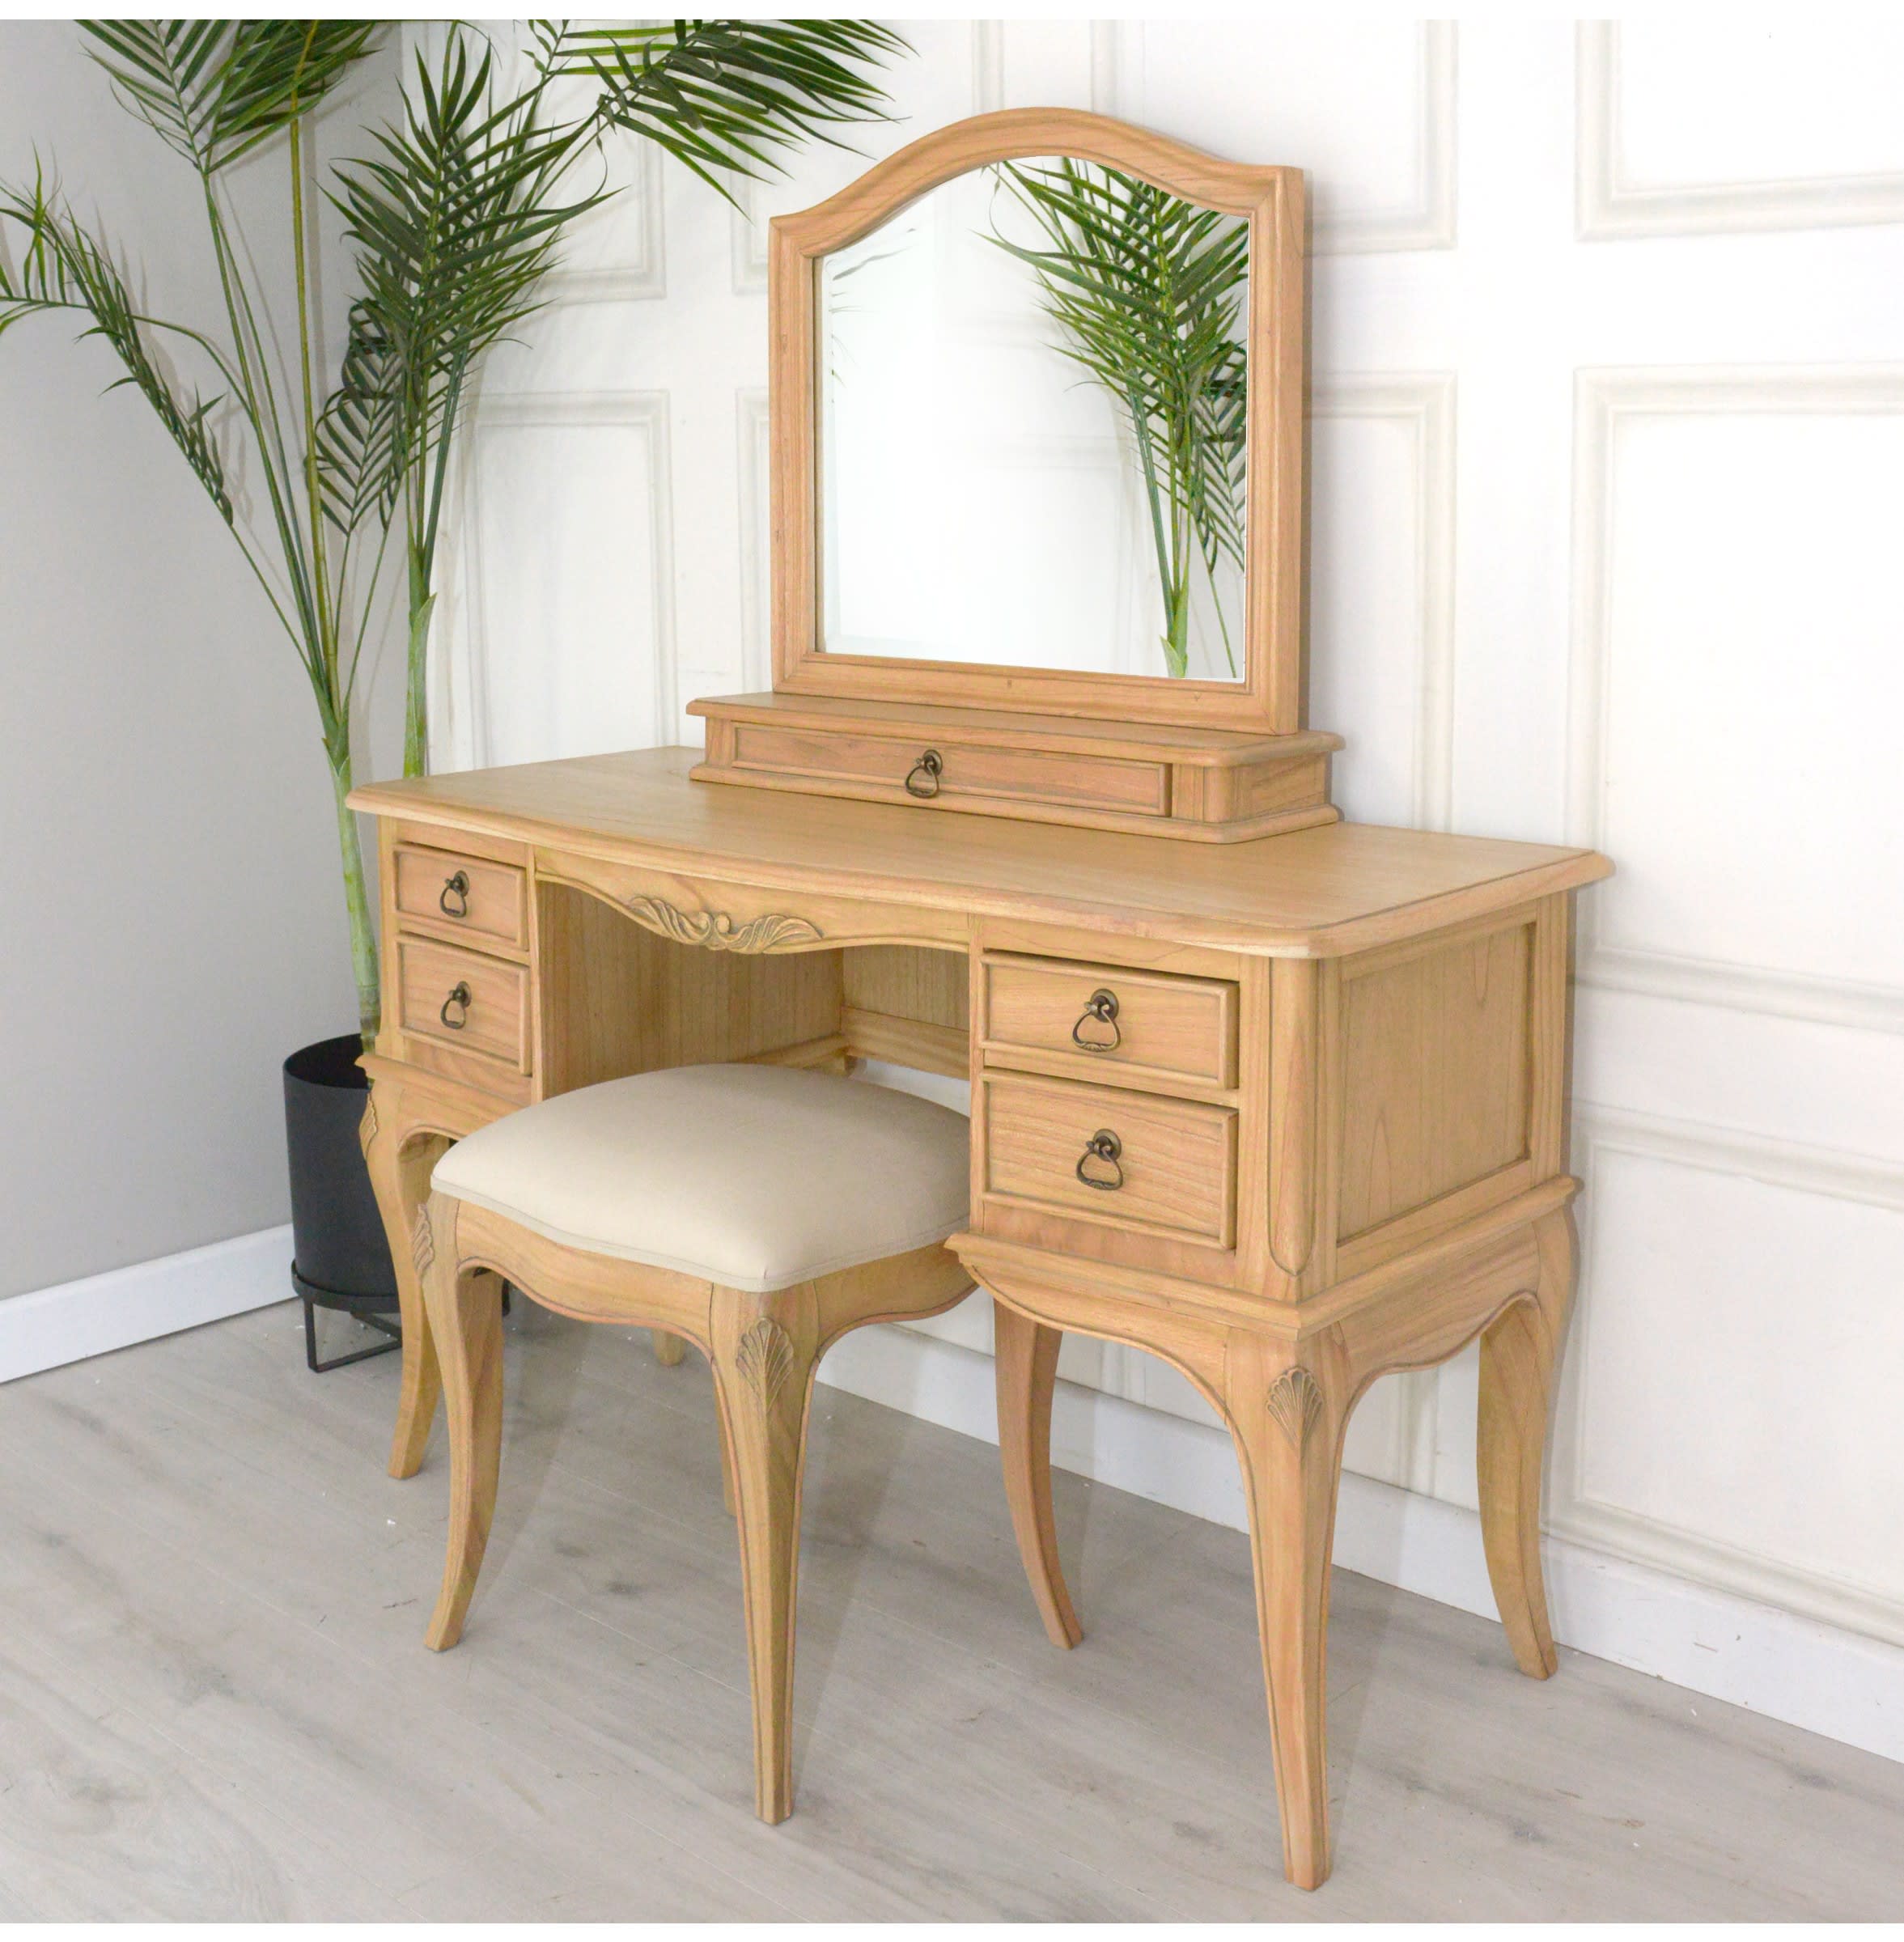 Limoges French Dressing Table Mirror and Stool Set by Baker Furniture